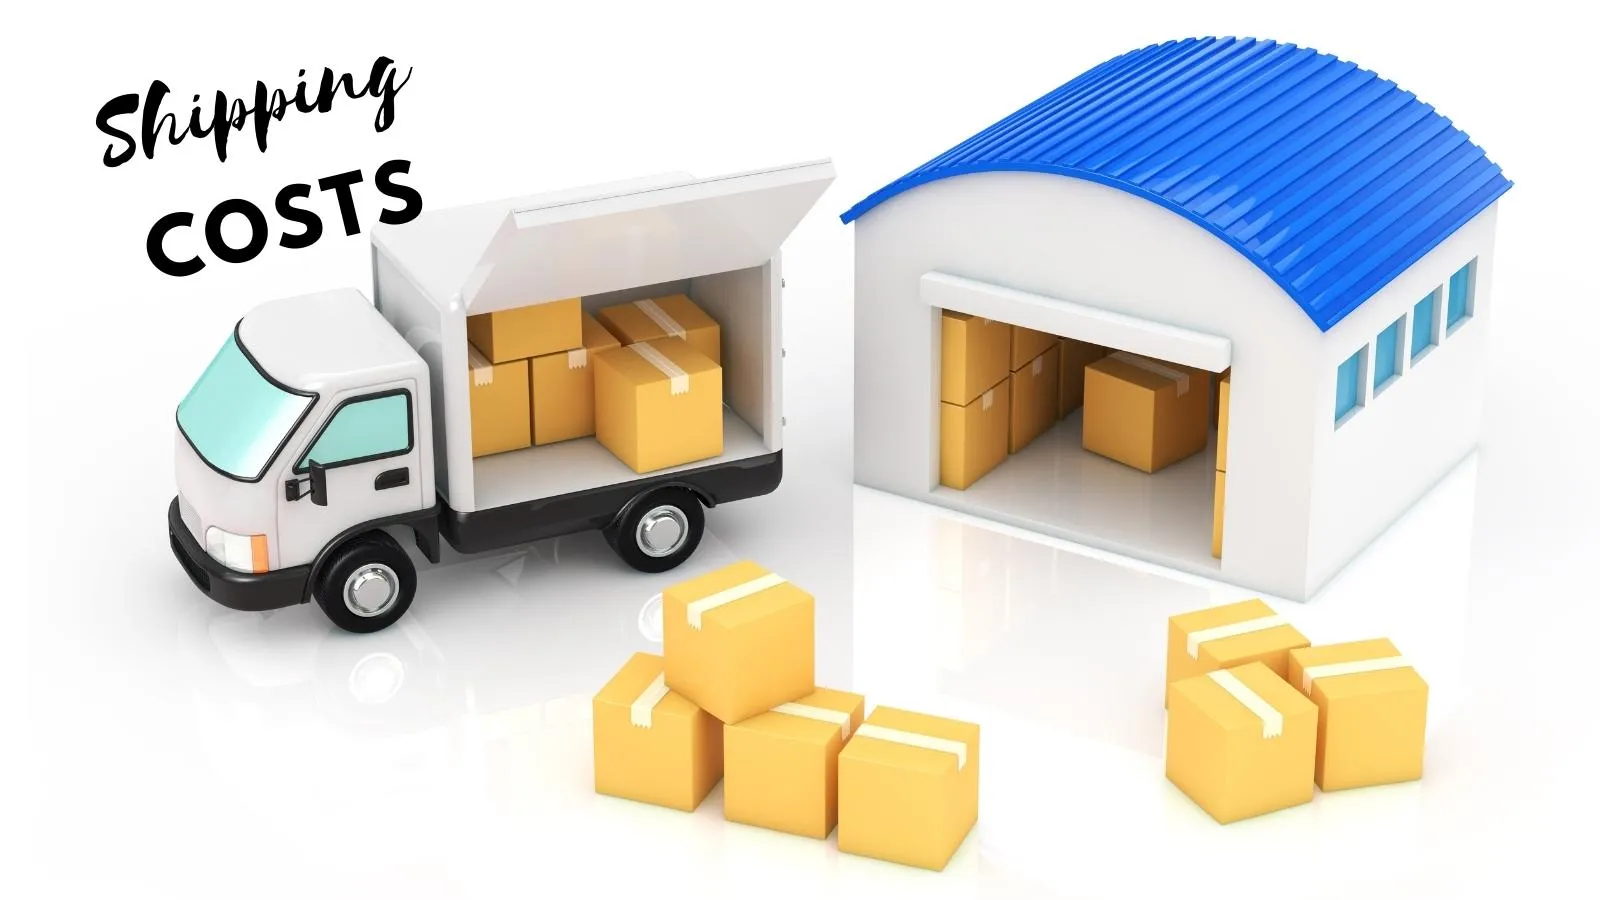 lower shipping costs to maximize profits